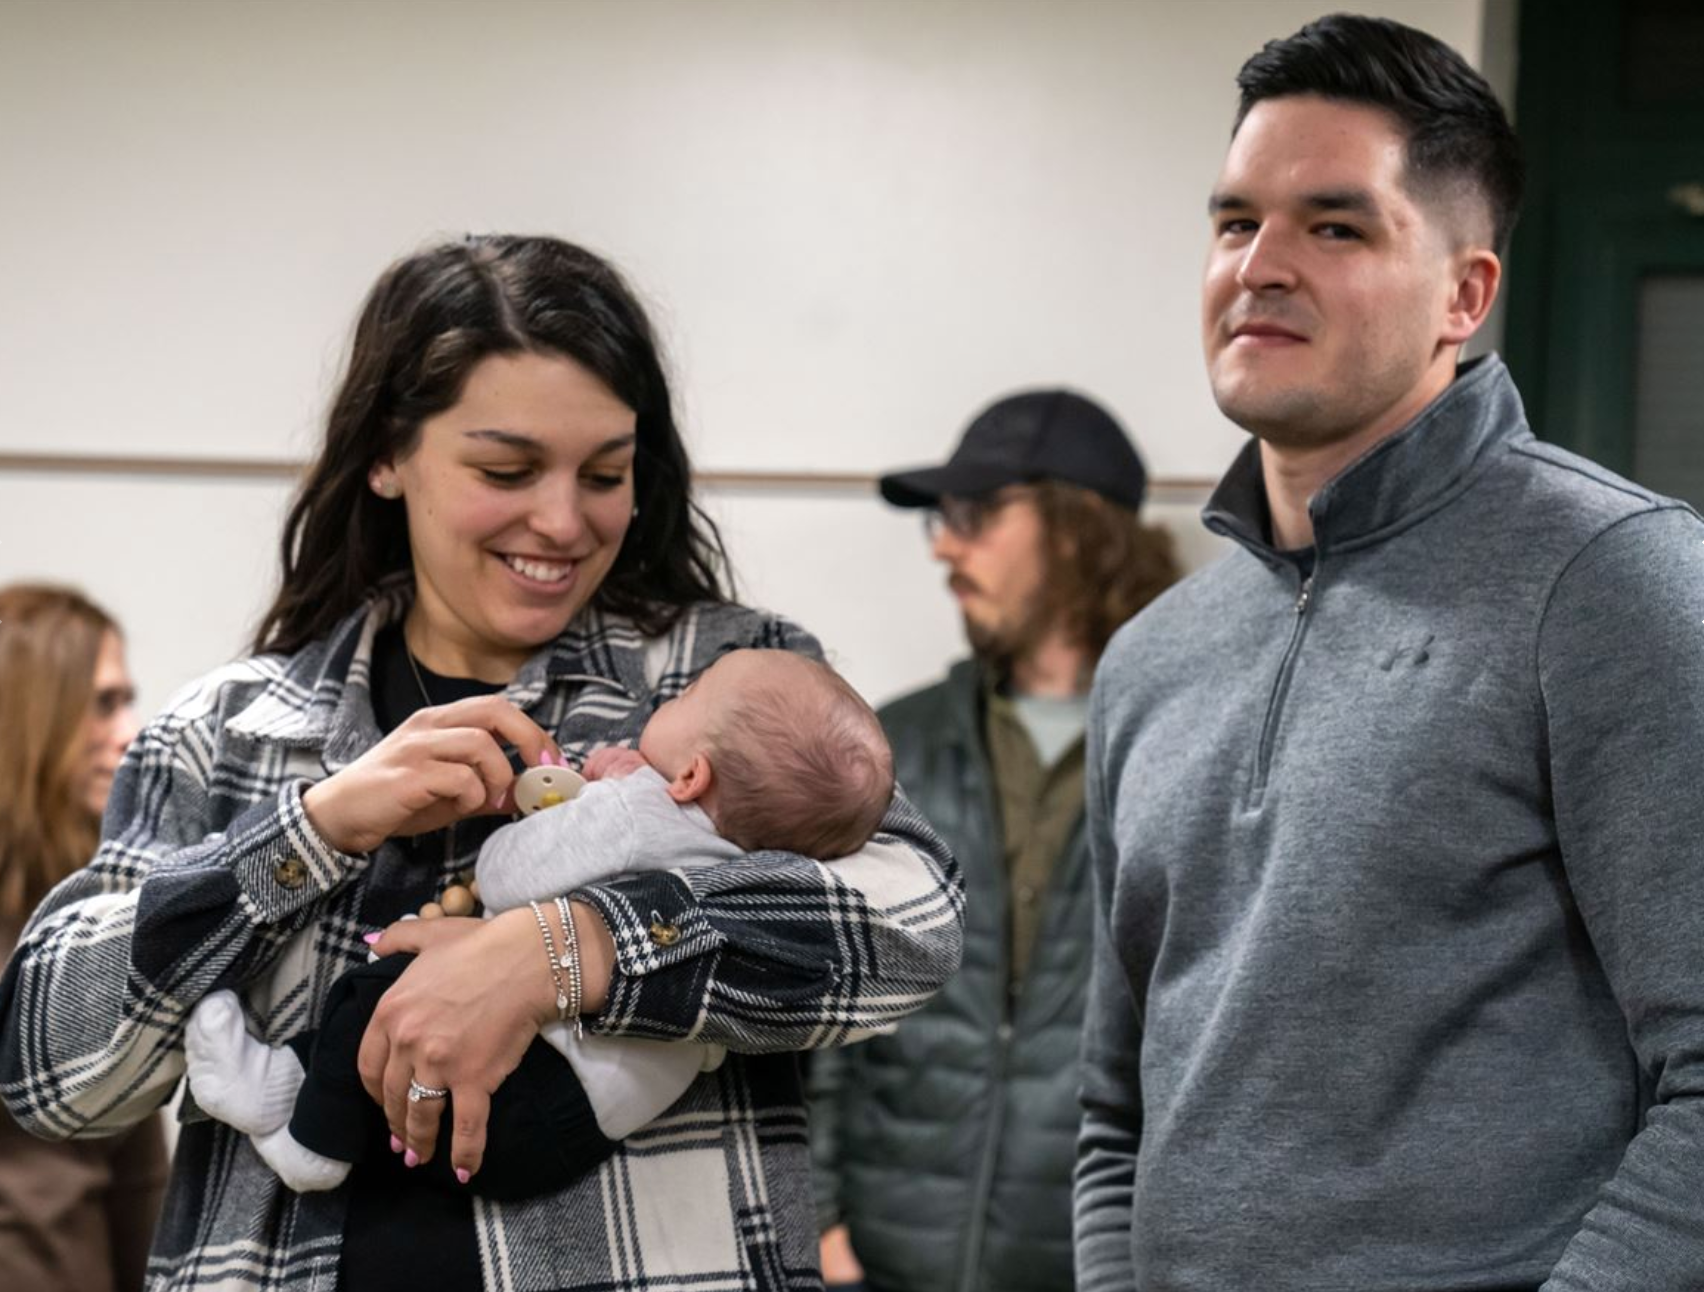 Alexis Simon, a special education teacher at Trafford Middle School, with her son, Dominic, and husband, Daniel, at a Penn-Trafford school board meeting where she thanked her colleagues for saving her after her heart stopped. (Post-Gazette)